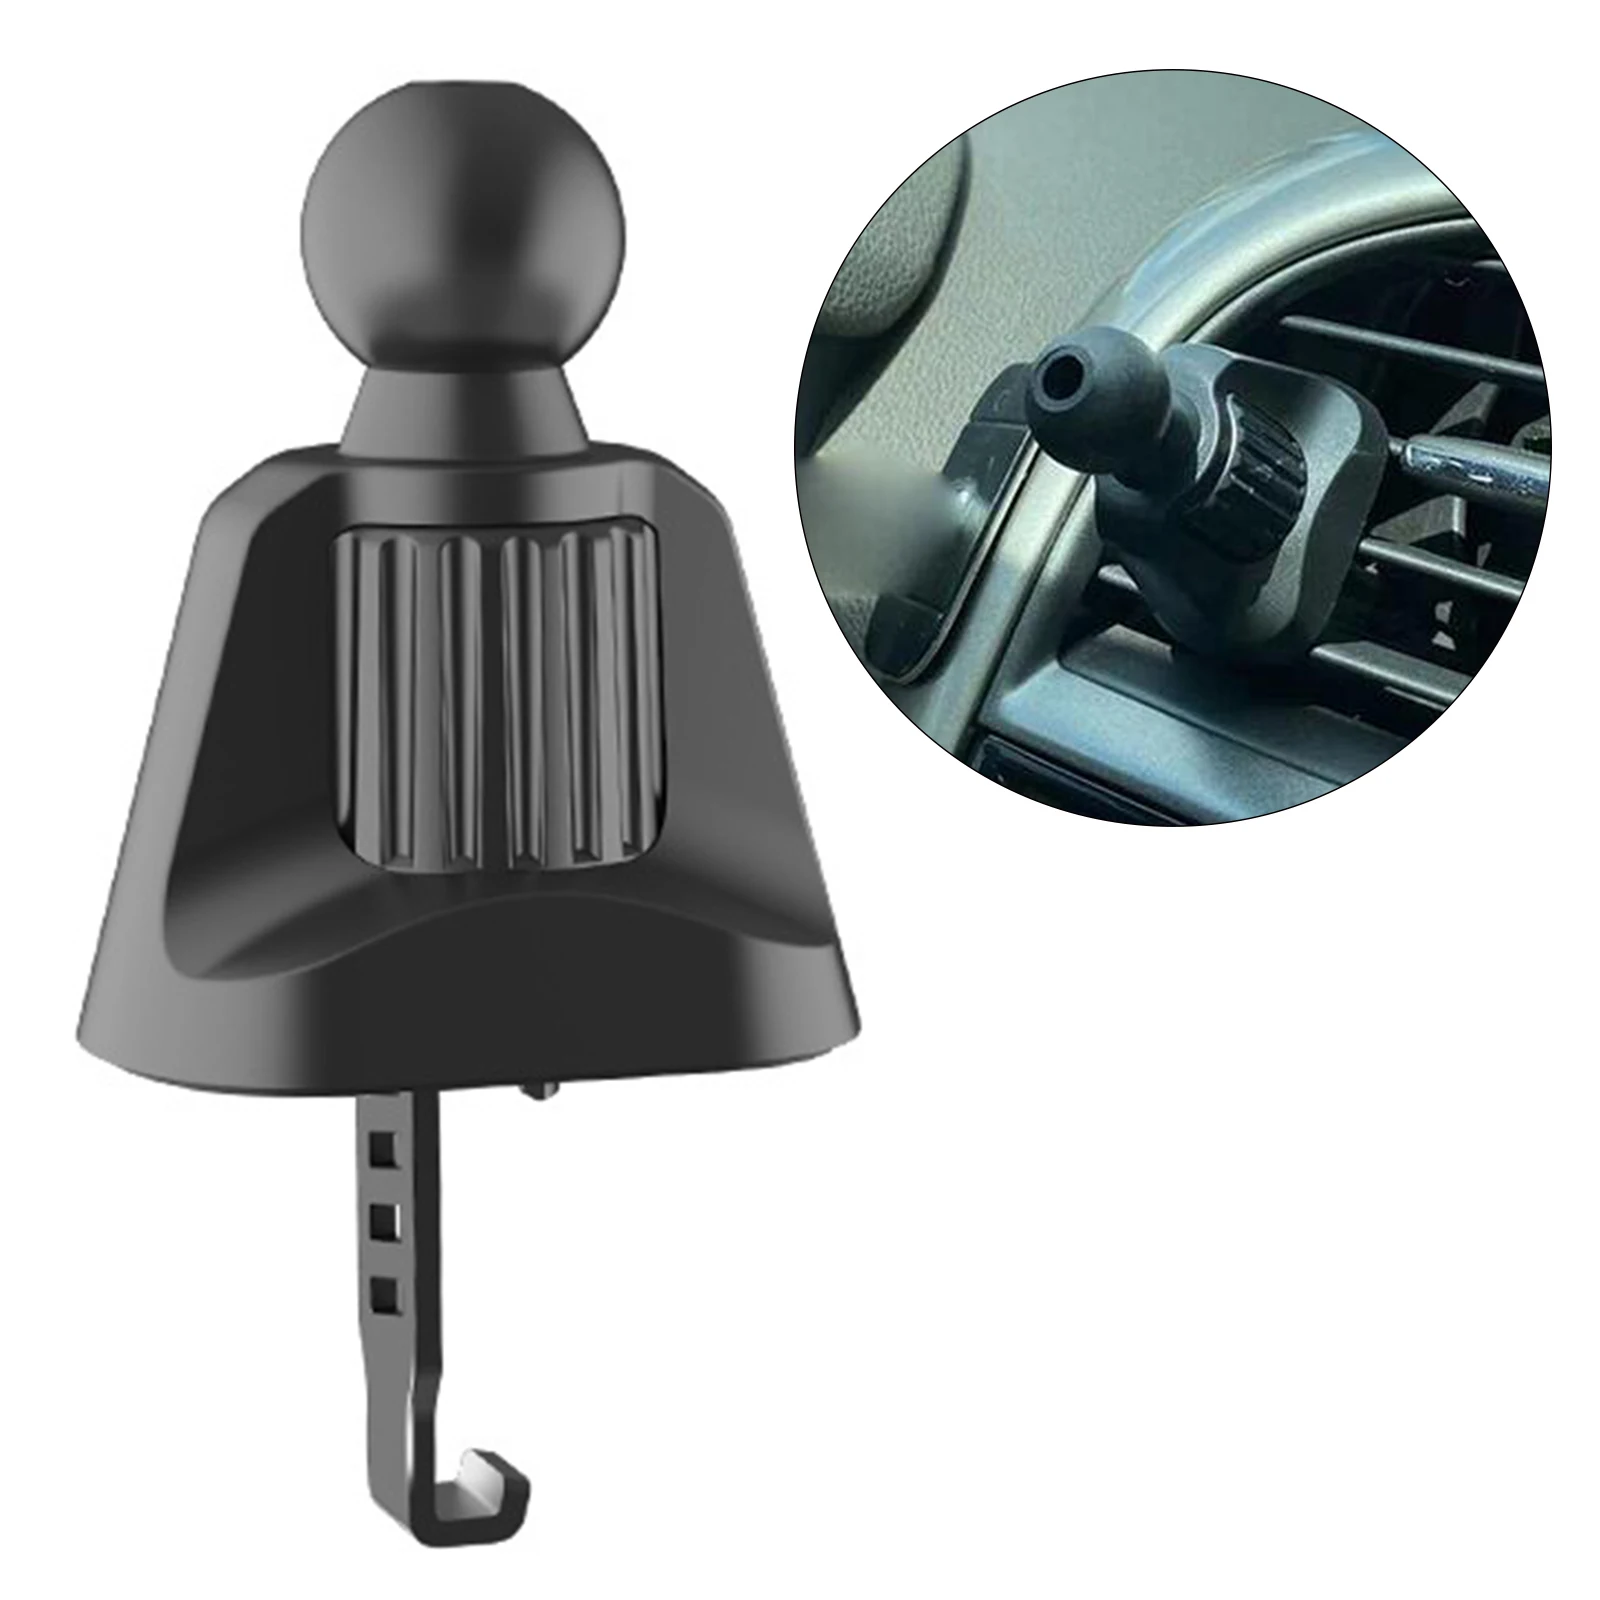 Car Air Vent Mount Clip Joint Ball Adapter Twist-Lock Phone Holder Stand Anti-Shake Black